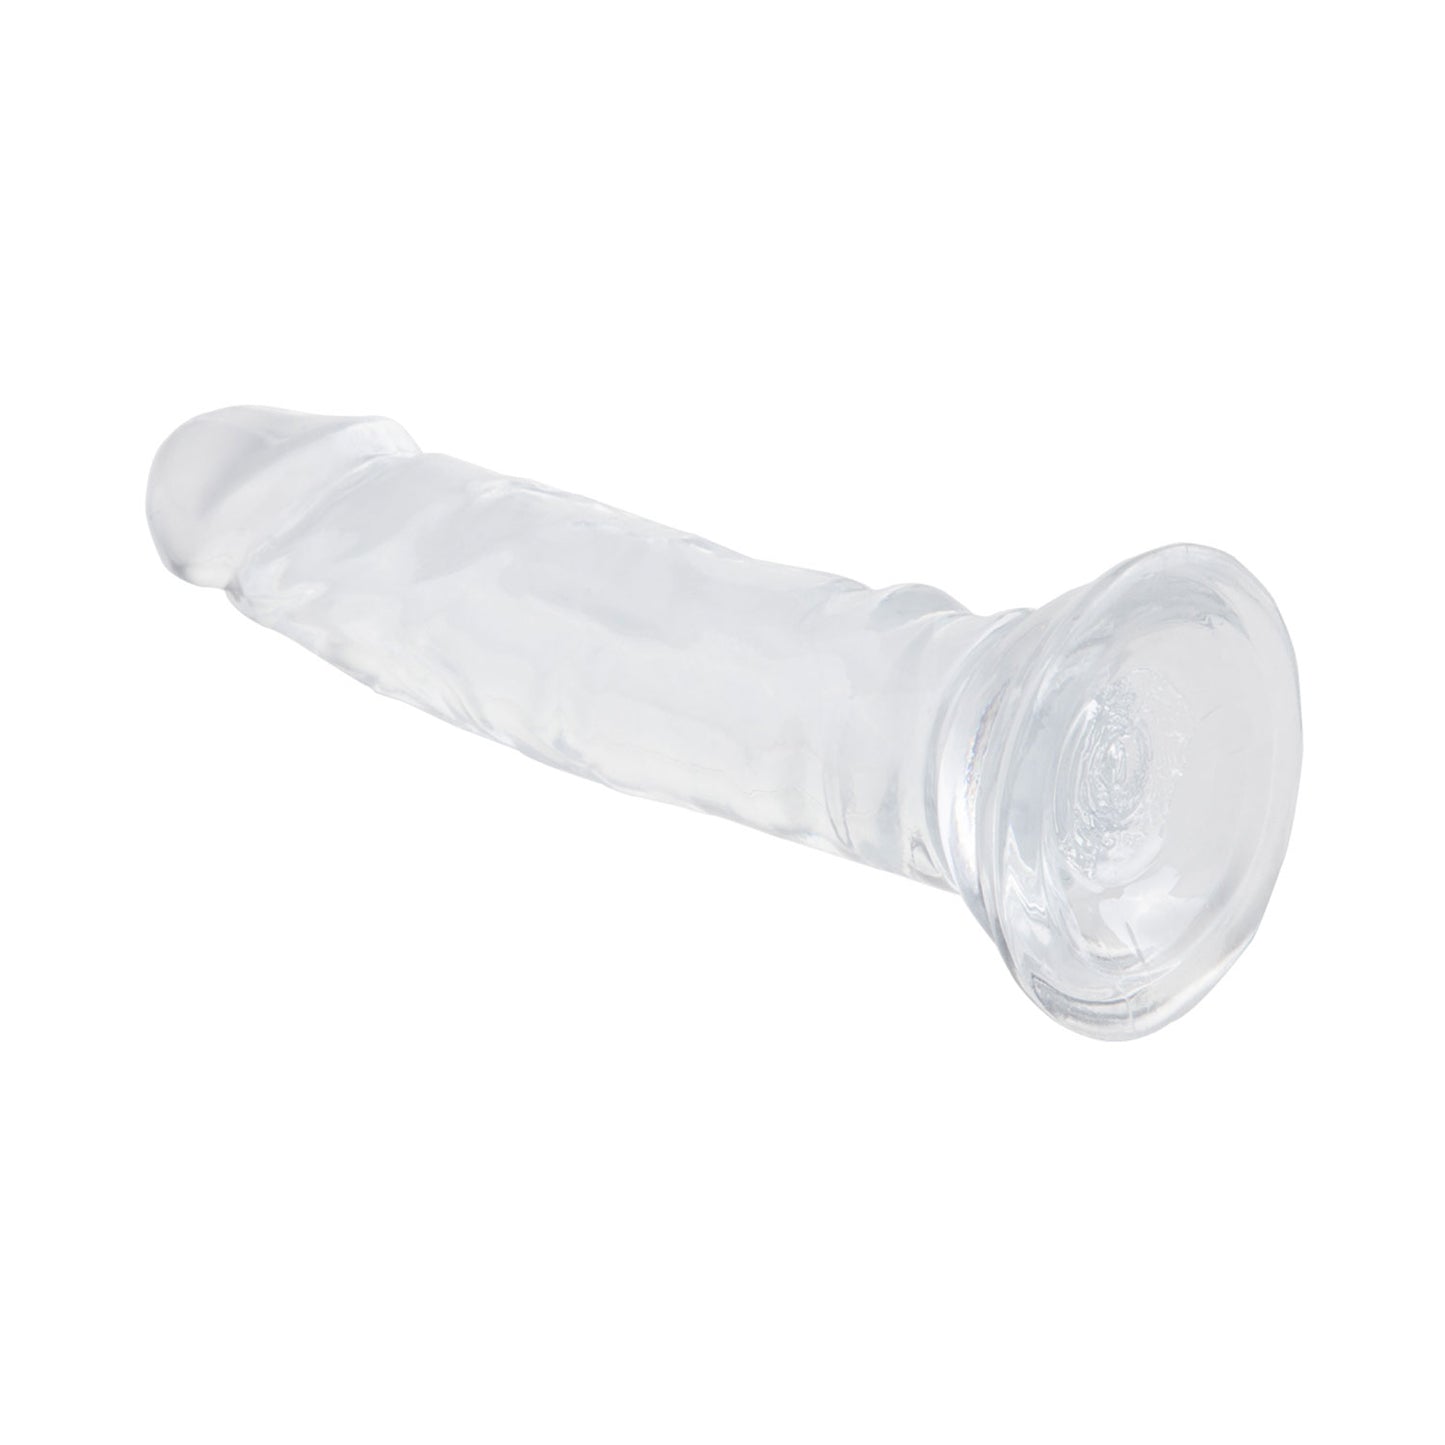 The Horny Company - No Frills Dildo 16cm x 3.3cm Suction Cup Dong Clear